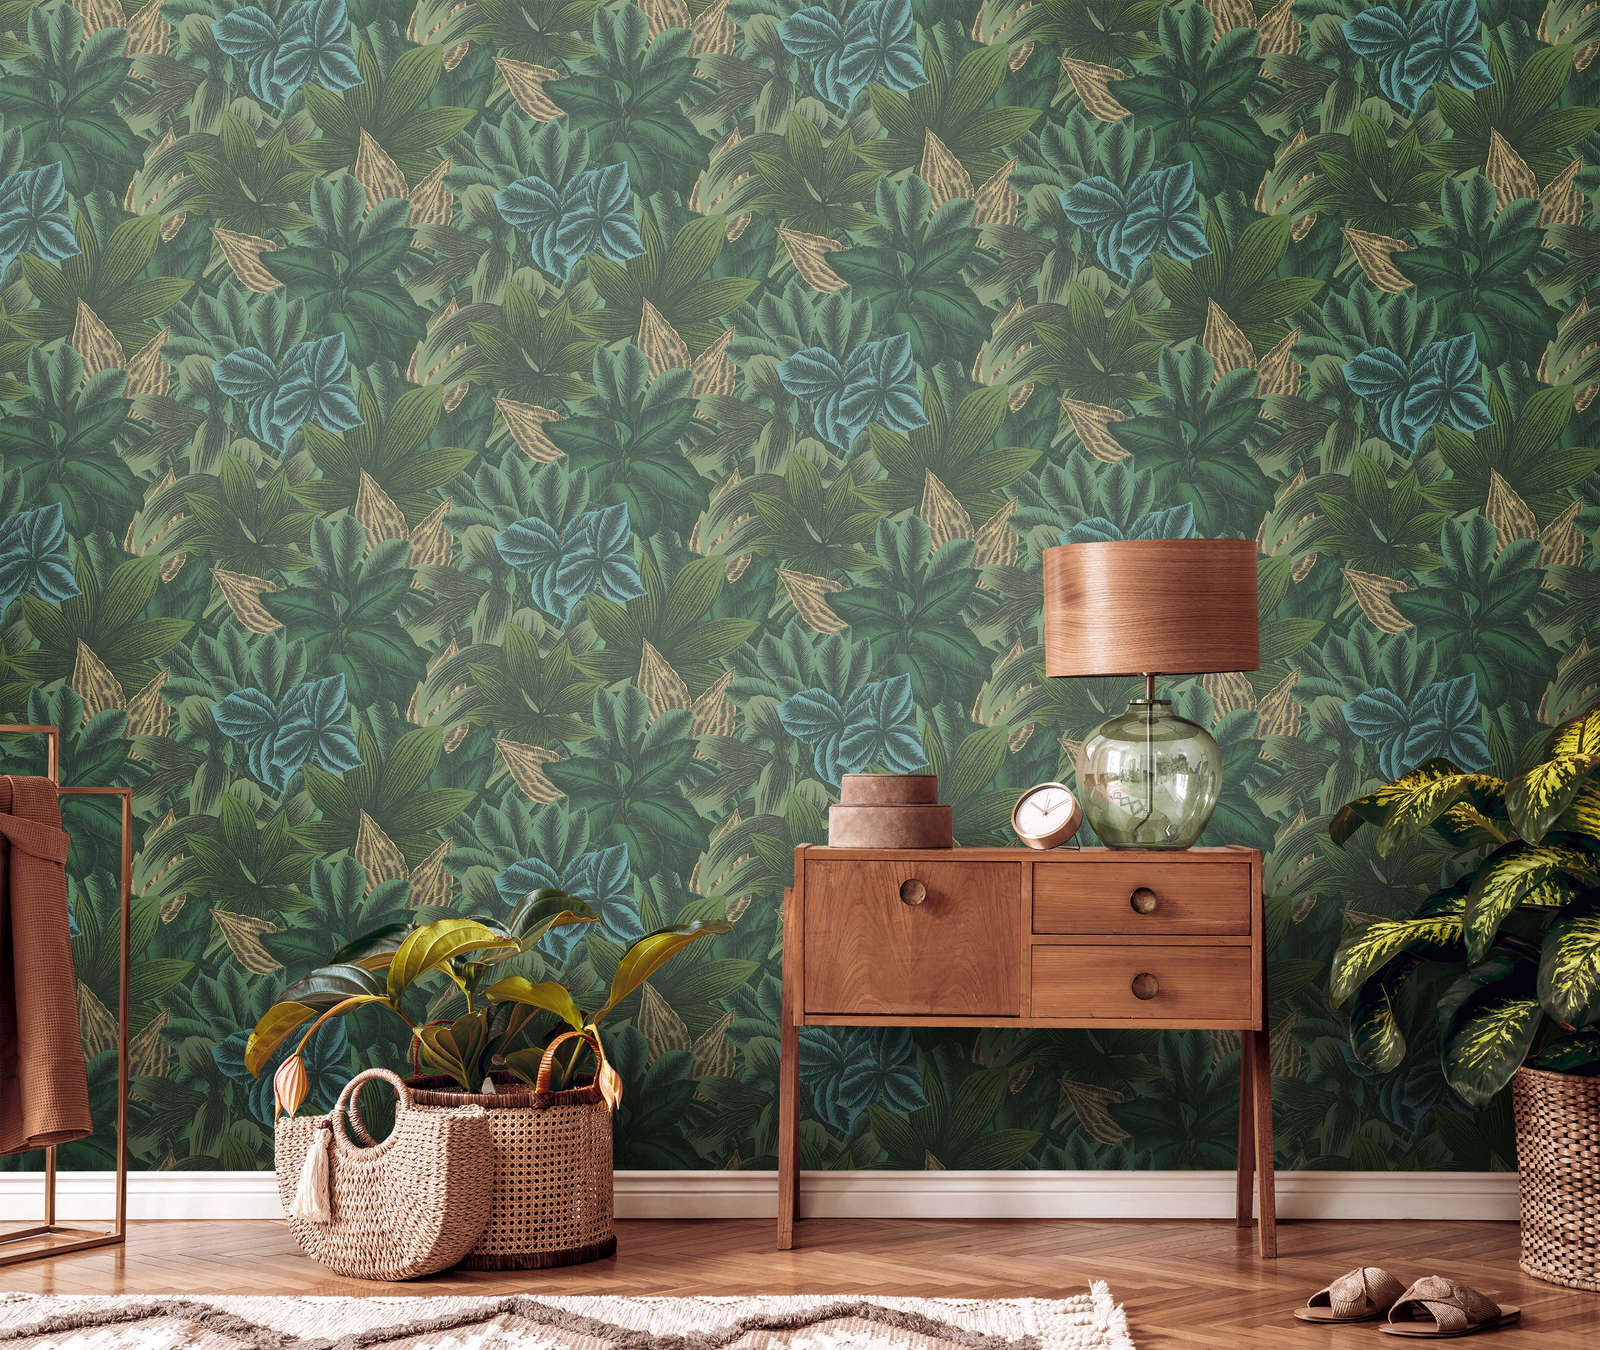             Jungle wallpaper with tropical leaf pattern - green, yellow
        